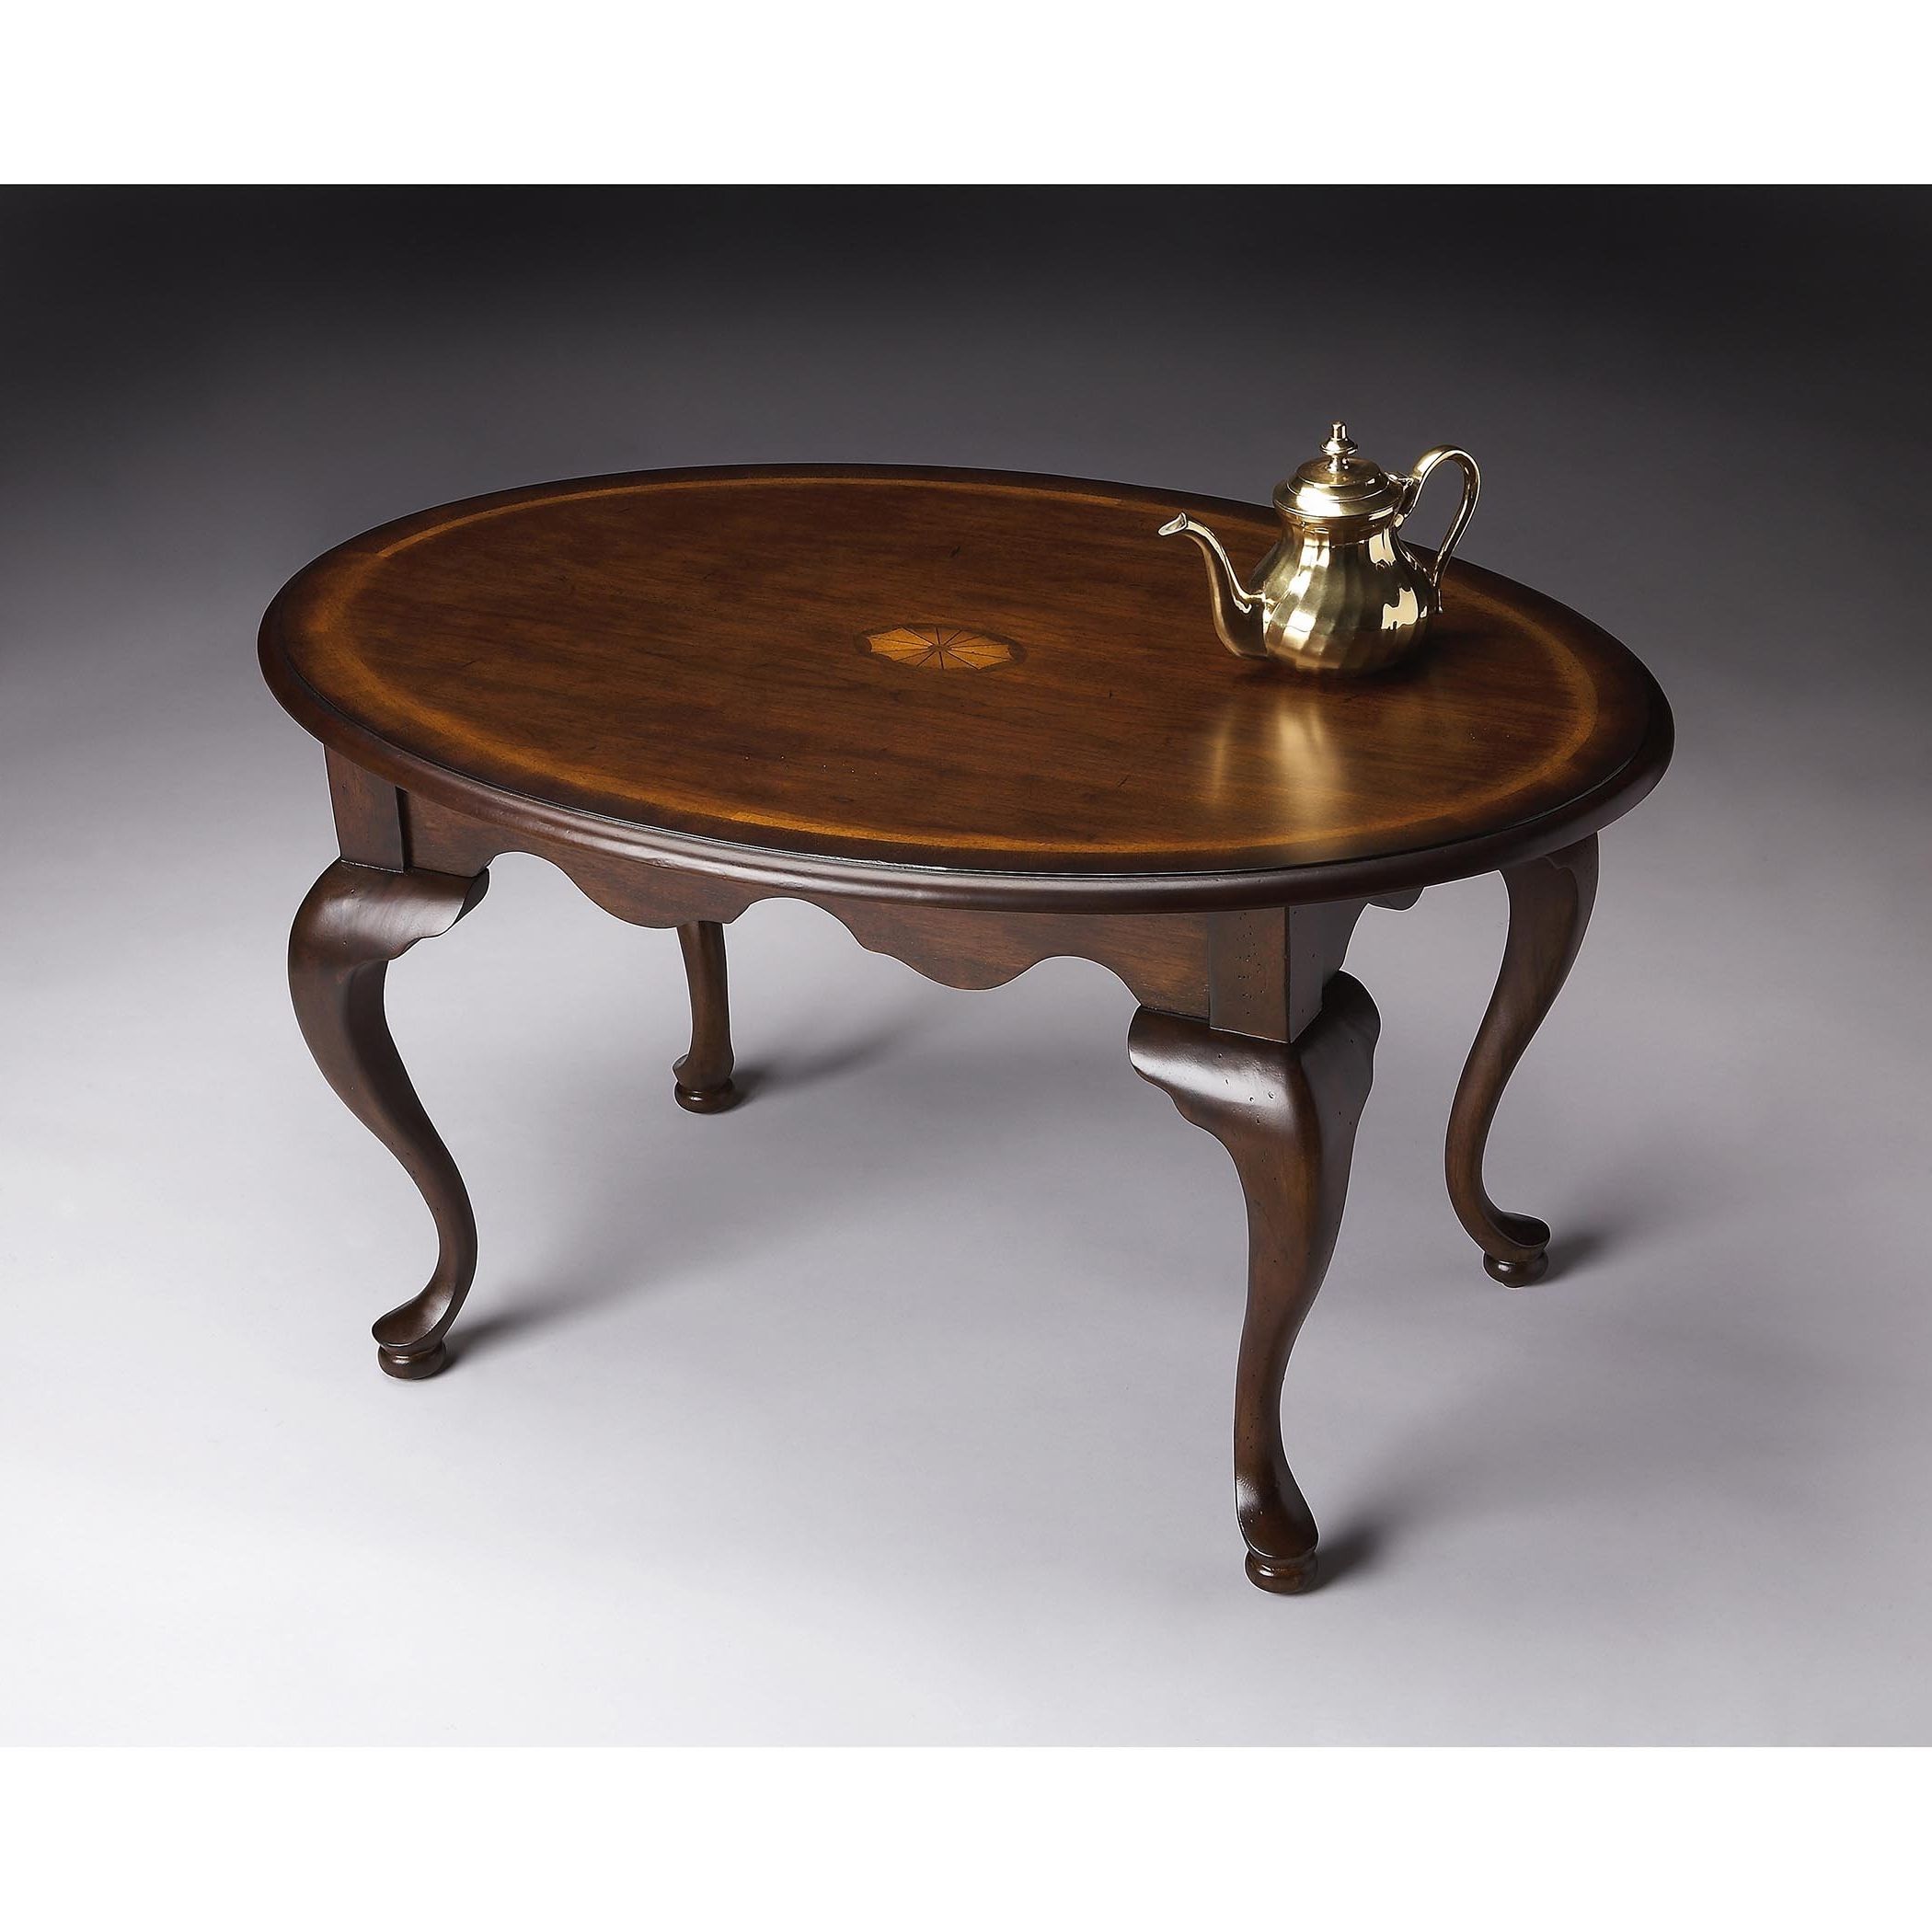 2019 Winslet Cherry Finish Wood Oval Coffee Tables With Casters Throughout Butler Grace Plantation Cherry Oval Coffee Table – Dark Brown (View 8 of 20)